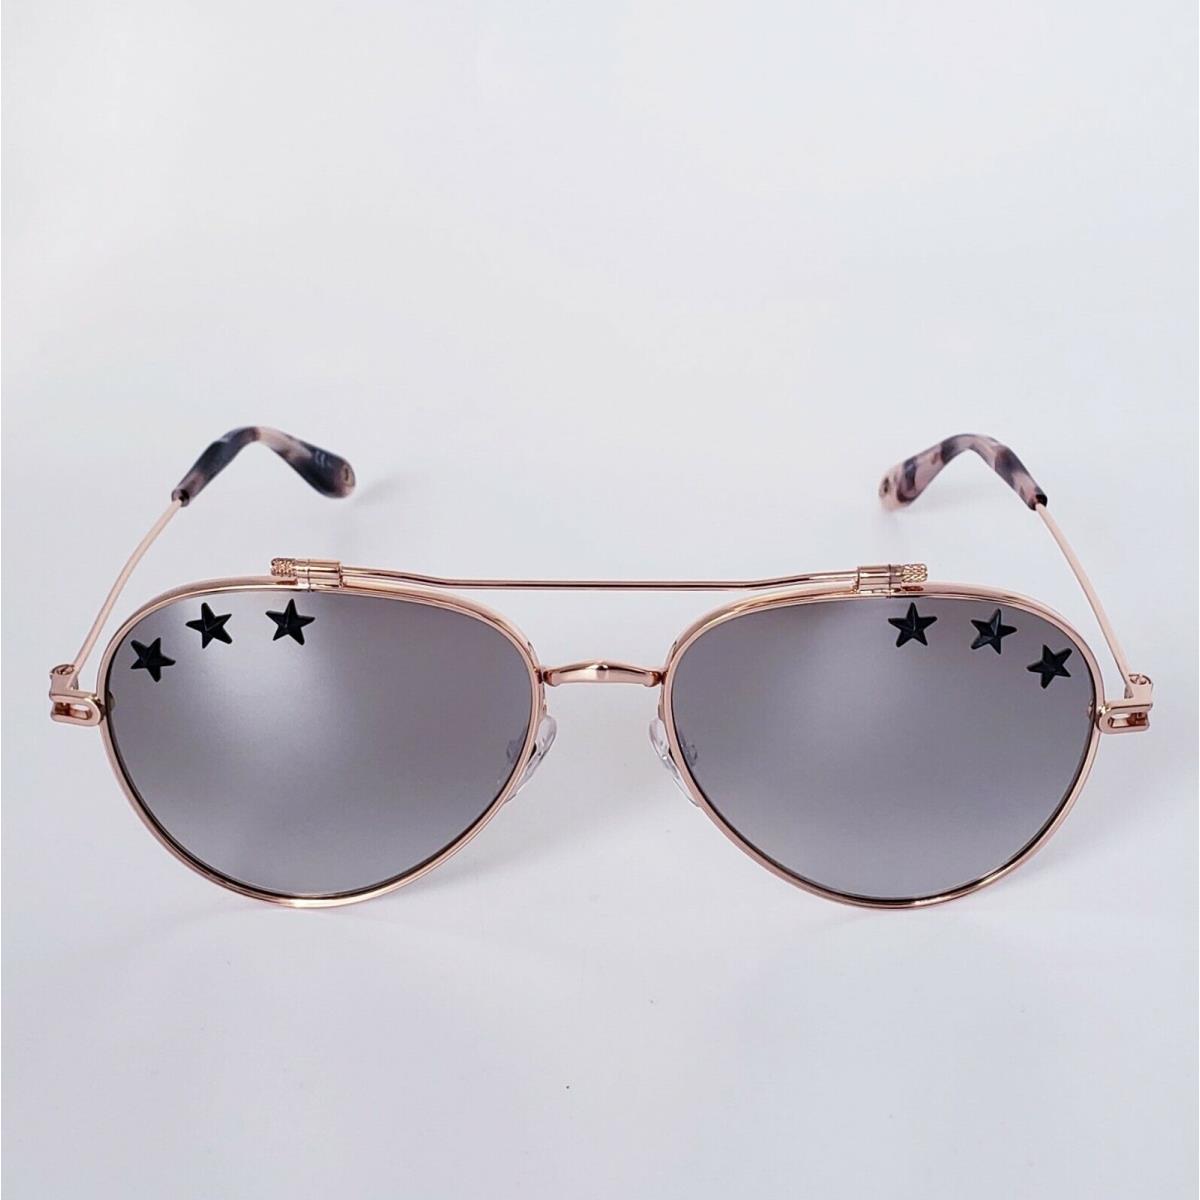 Givenchy sunglasses Star - Frame: Gold, Lens: Brown grey Gradient with Silver mirror effect 2